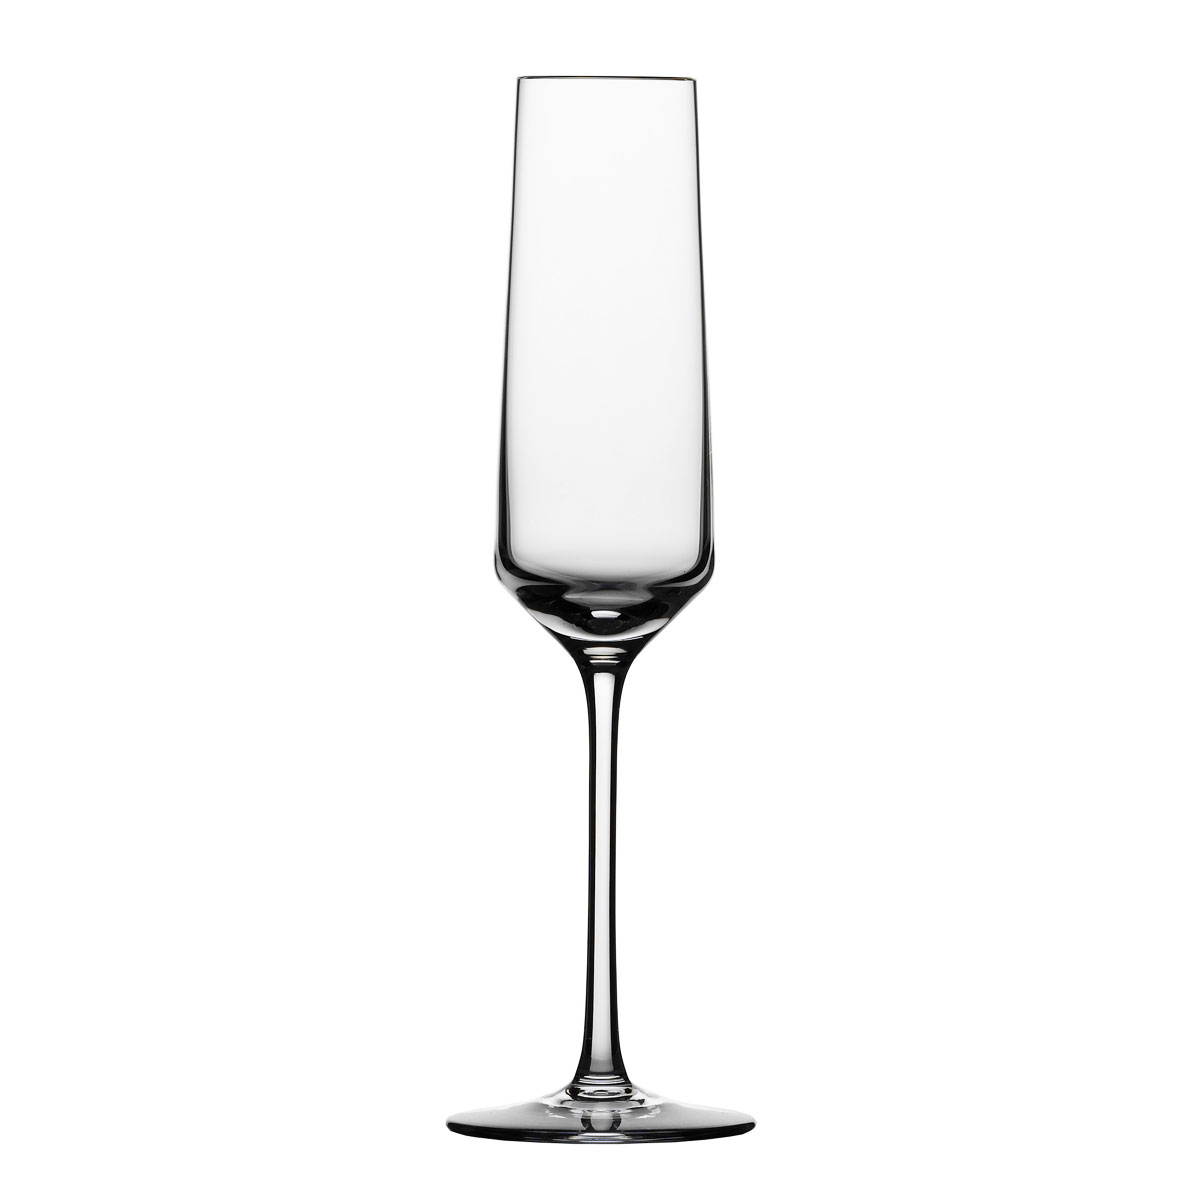 Schott Zwiesel Tritan Crystal Glass Cru Classic Stemware Collection Champagne Flute with Effervescence Points 8.4-Ounce Set of 6 